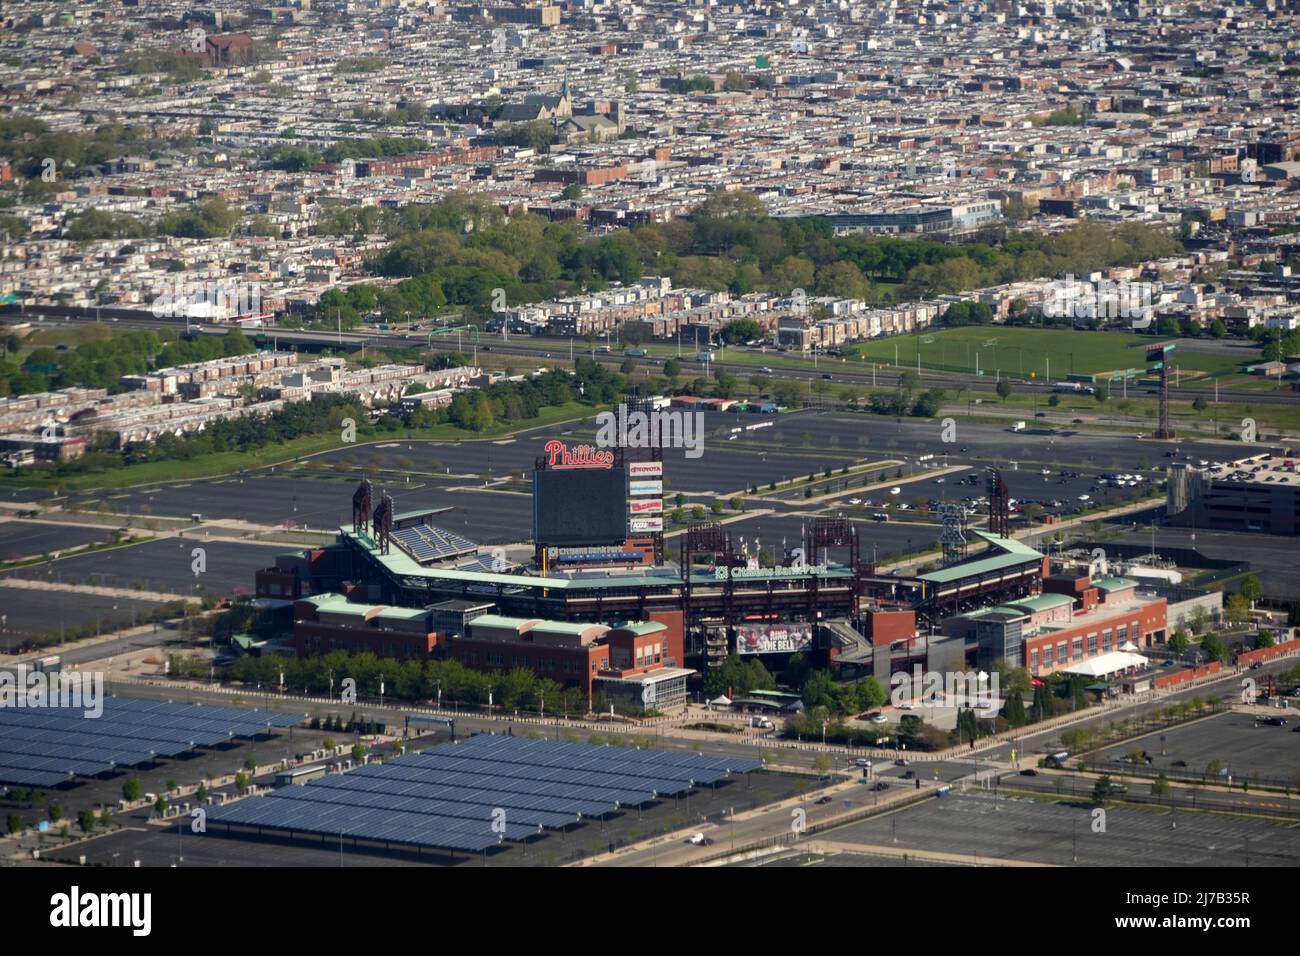 An aerial view of Citizens Bank Park, Friday, Apr. 29, 2022, in Philadelphia. The stadium is the home of the Philadelphia Phillies. Stock Photo